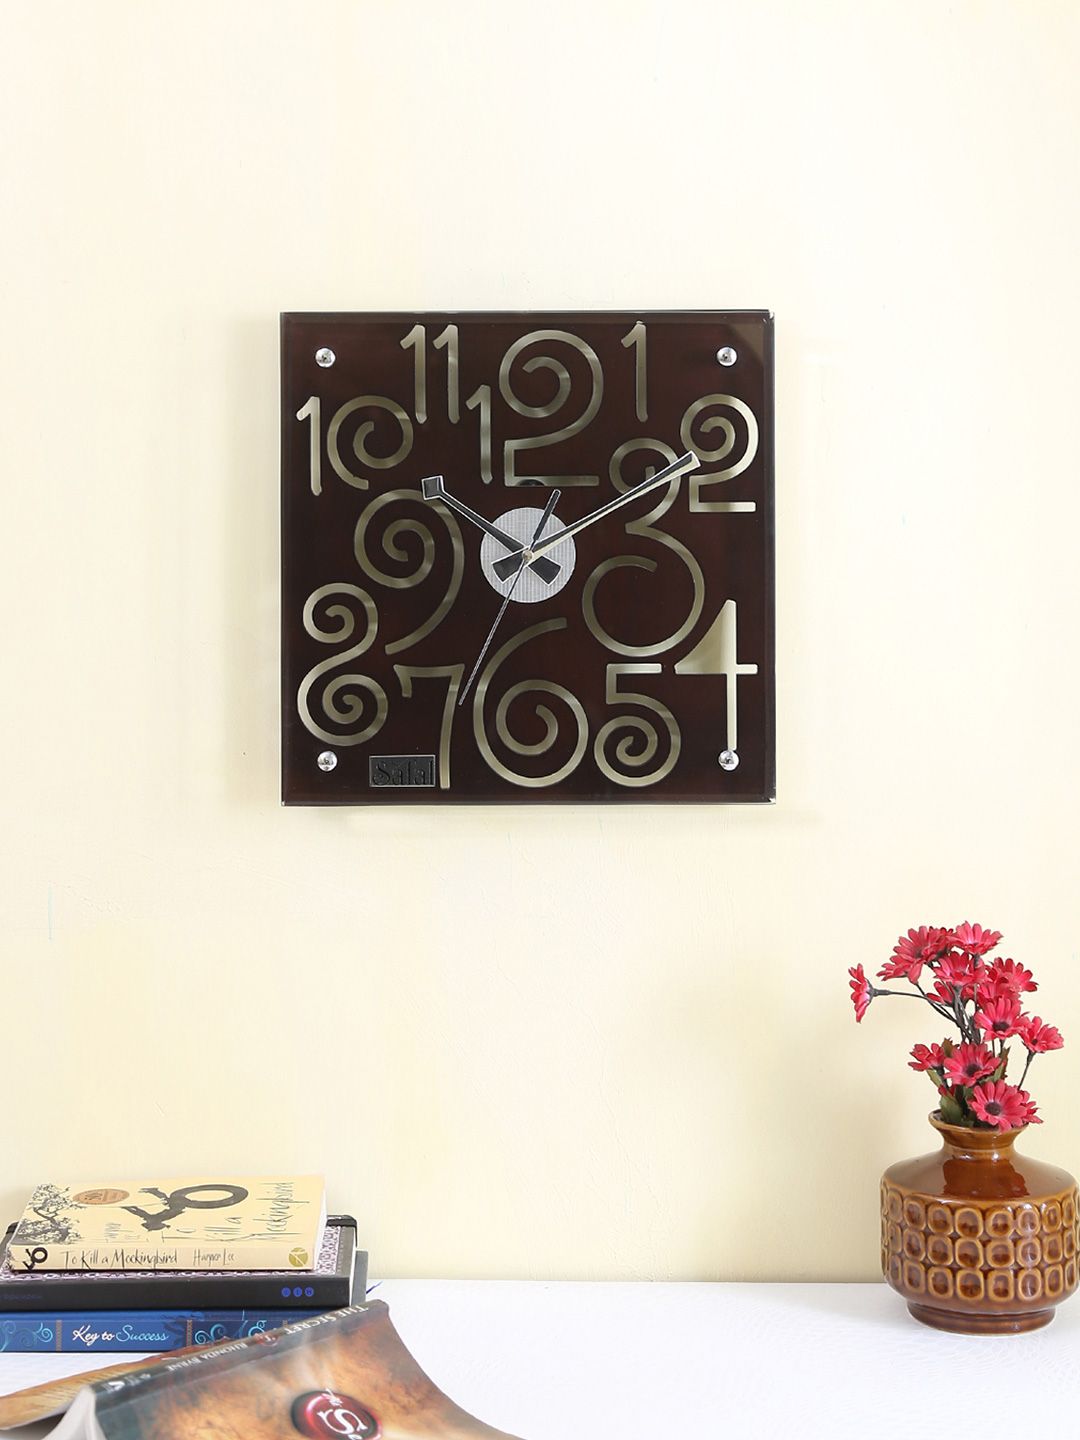 Safal Black Dial Square Wooden Analogue Wall Clock Price in India